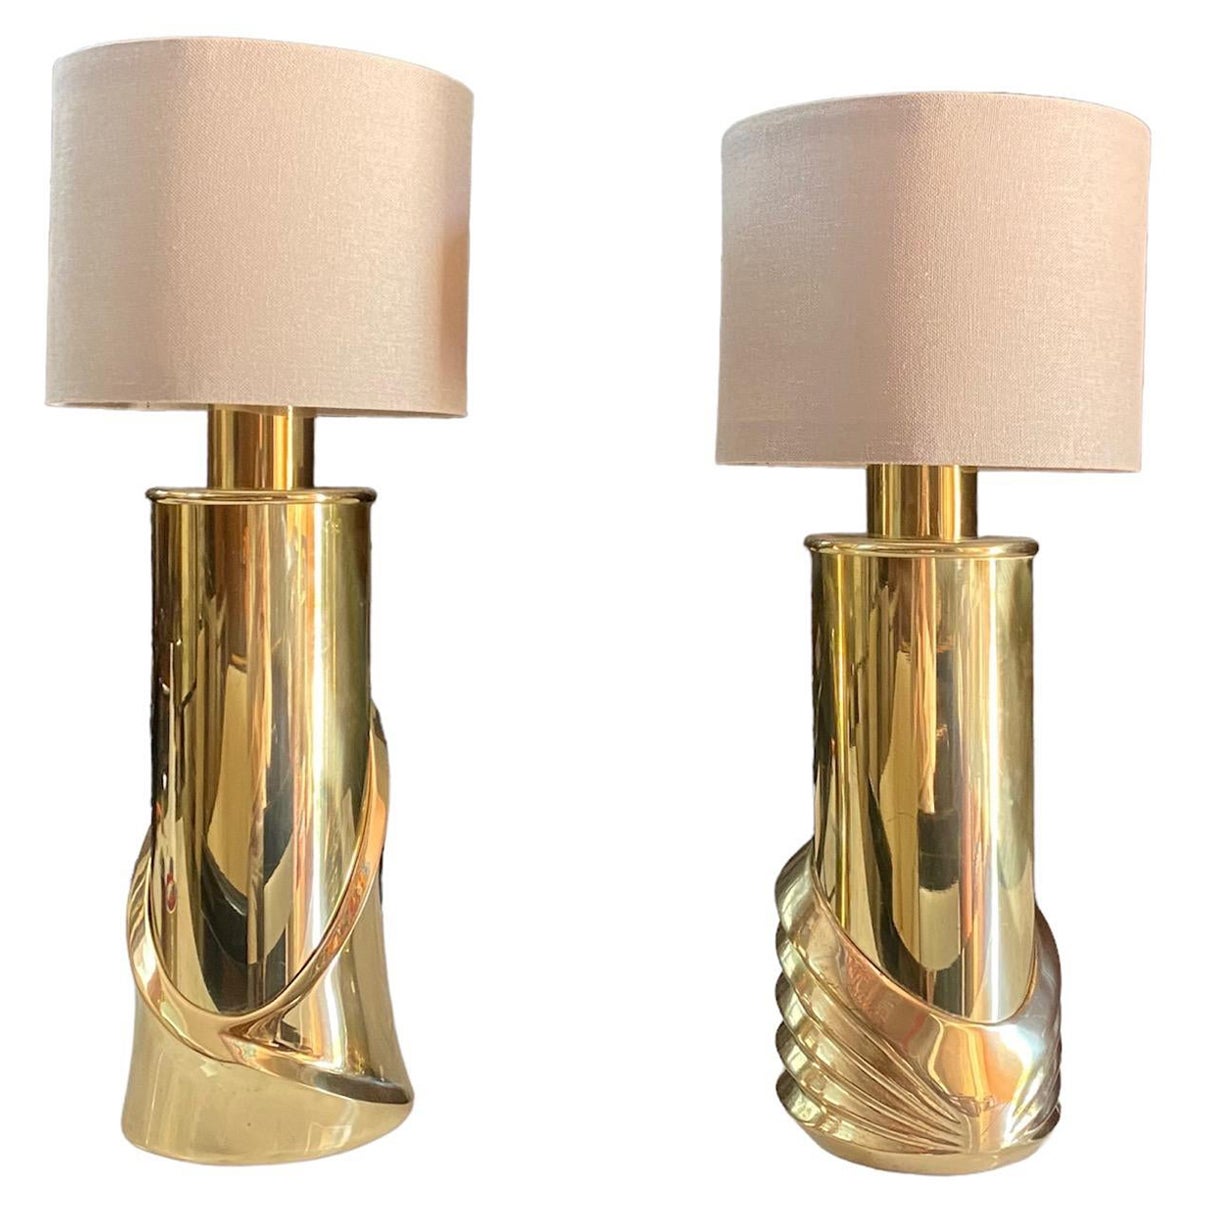 Luciano Frigerio Set of 2 Brass Desk Lamps